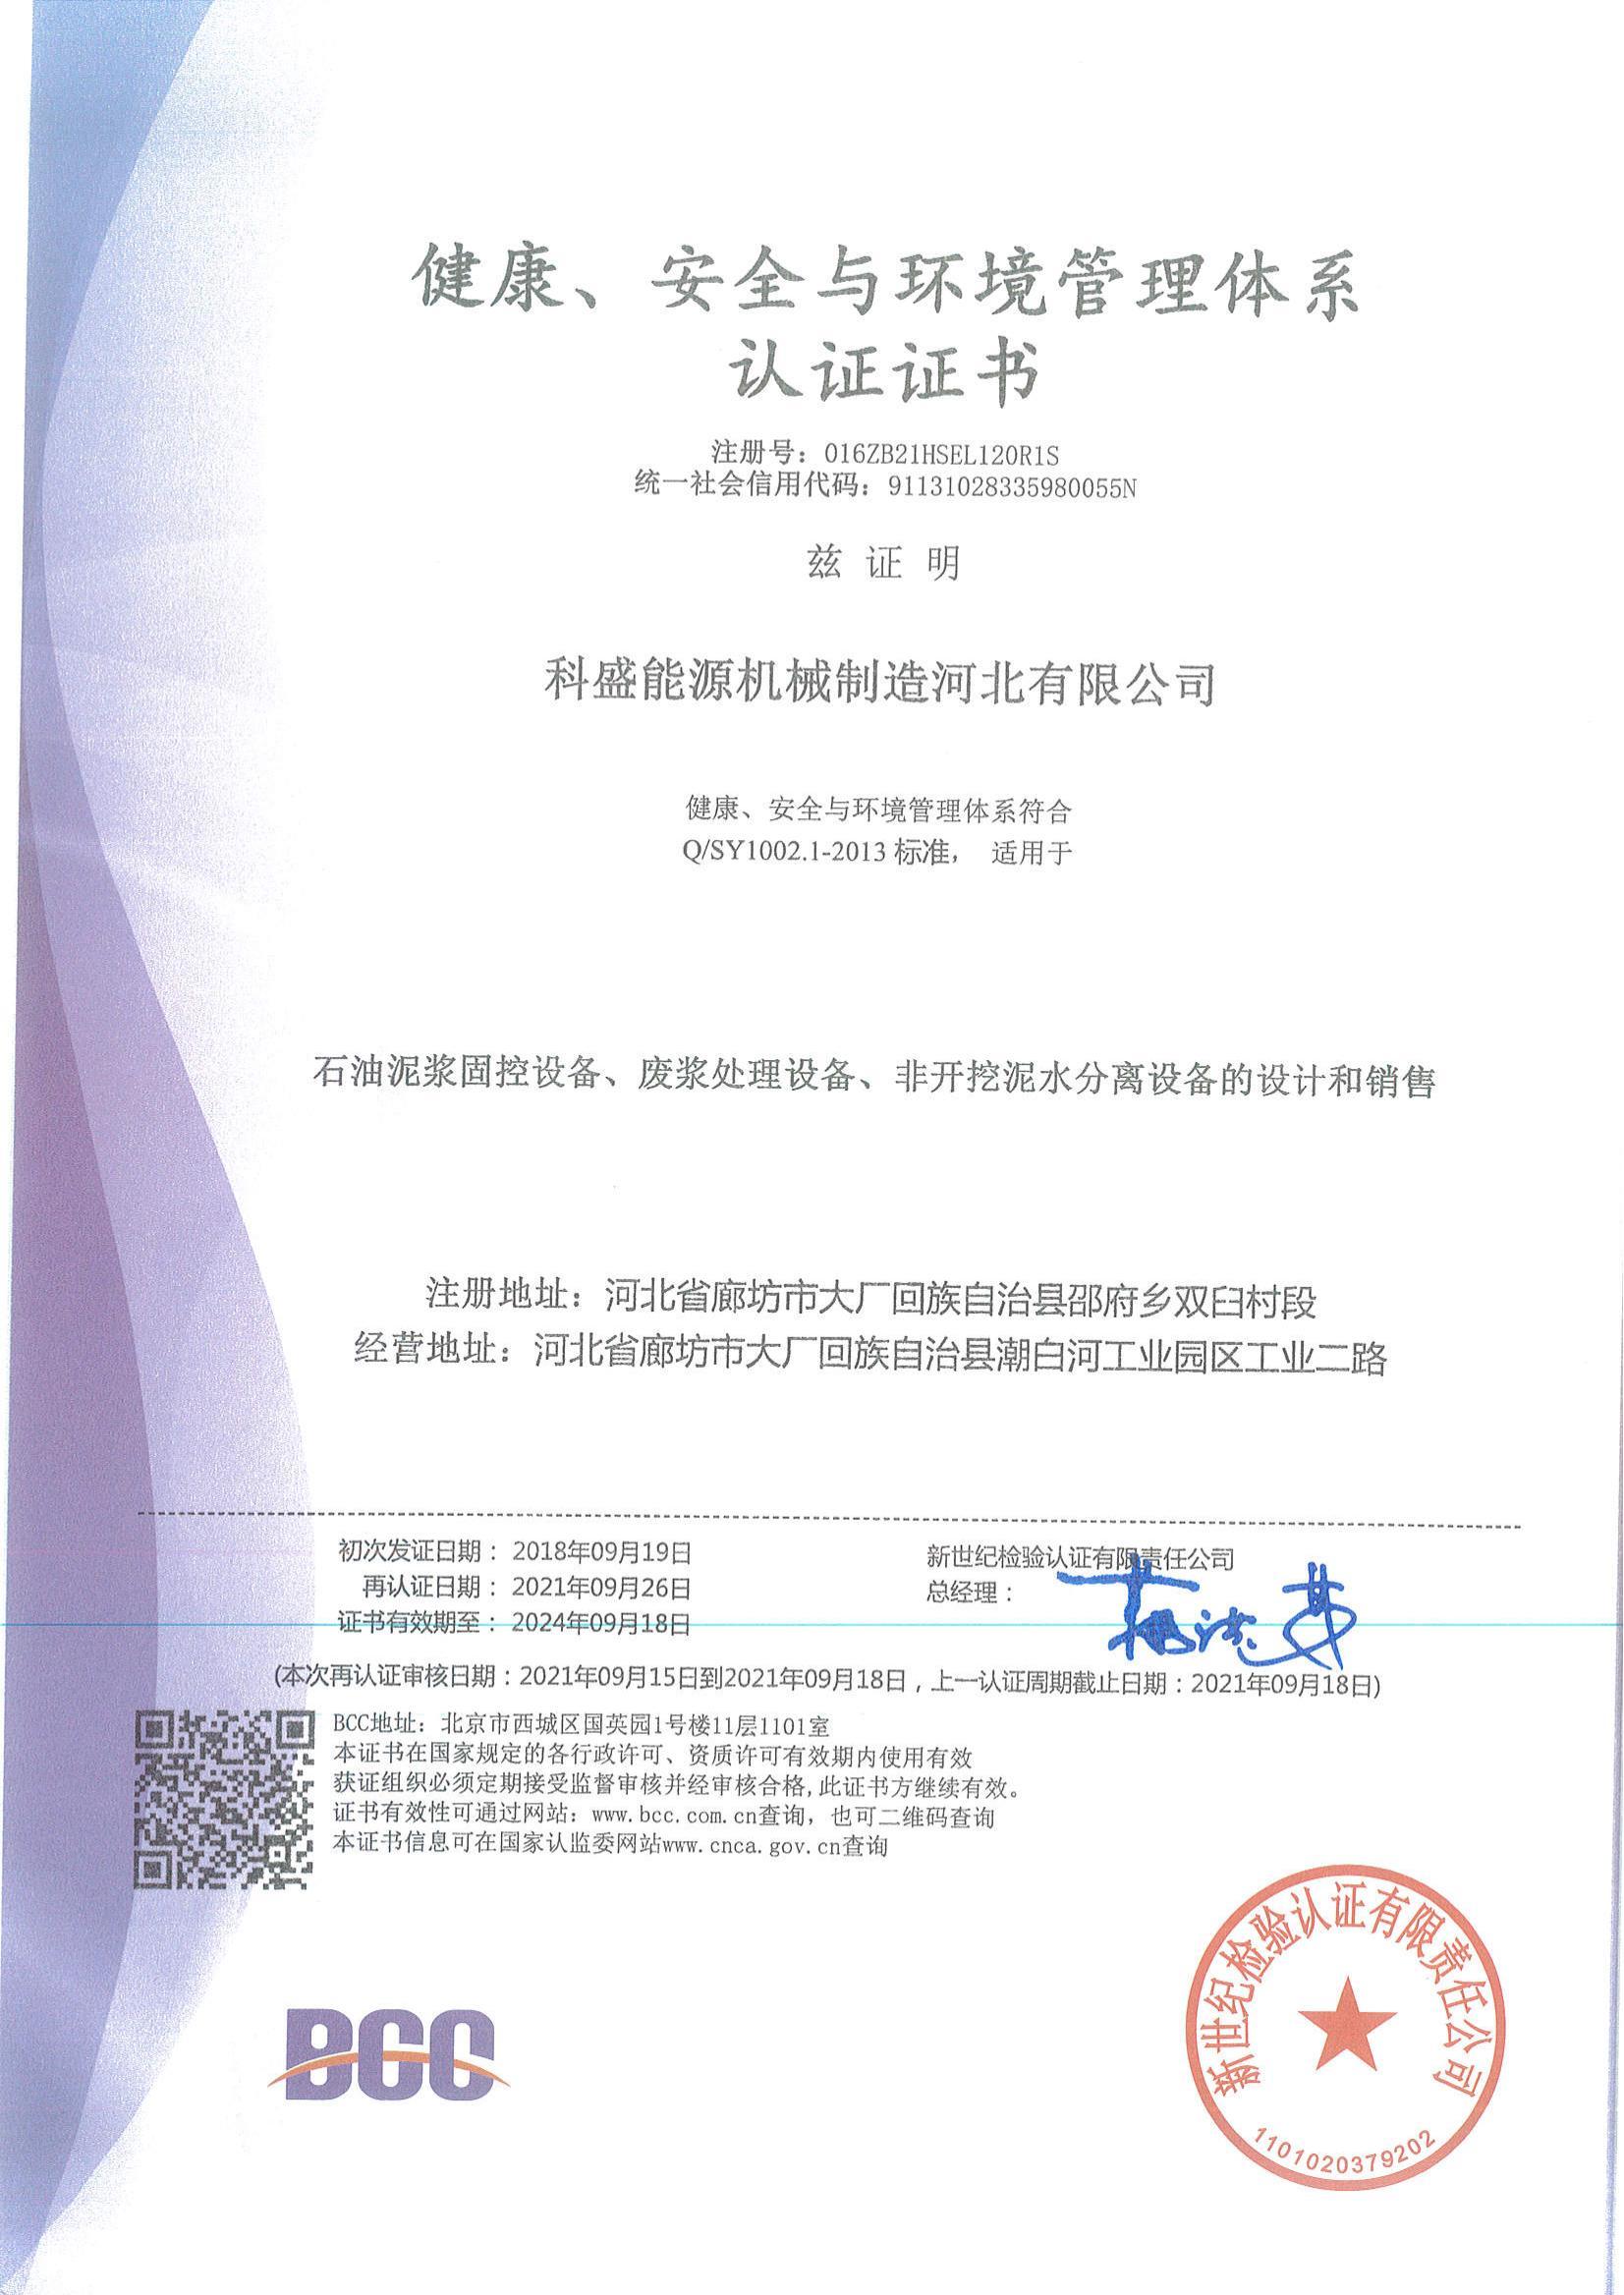 Health, Safety and Environmental Management System Certification